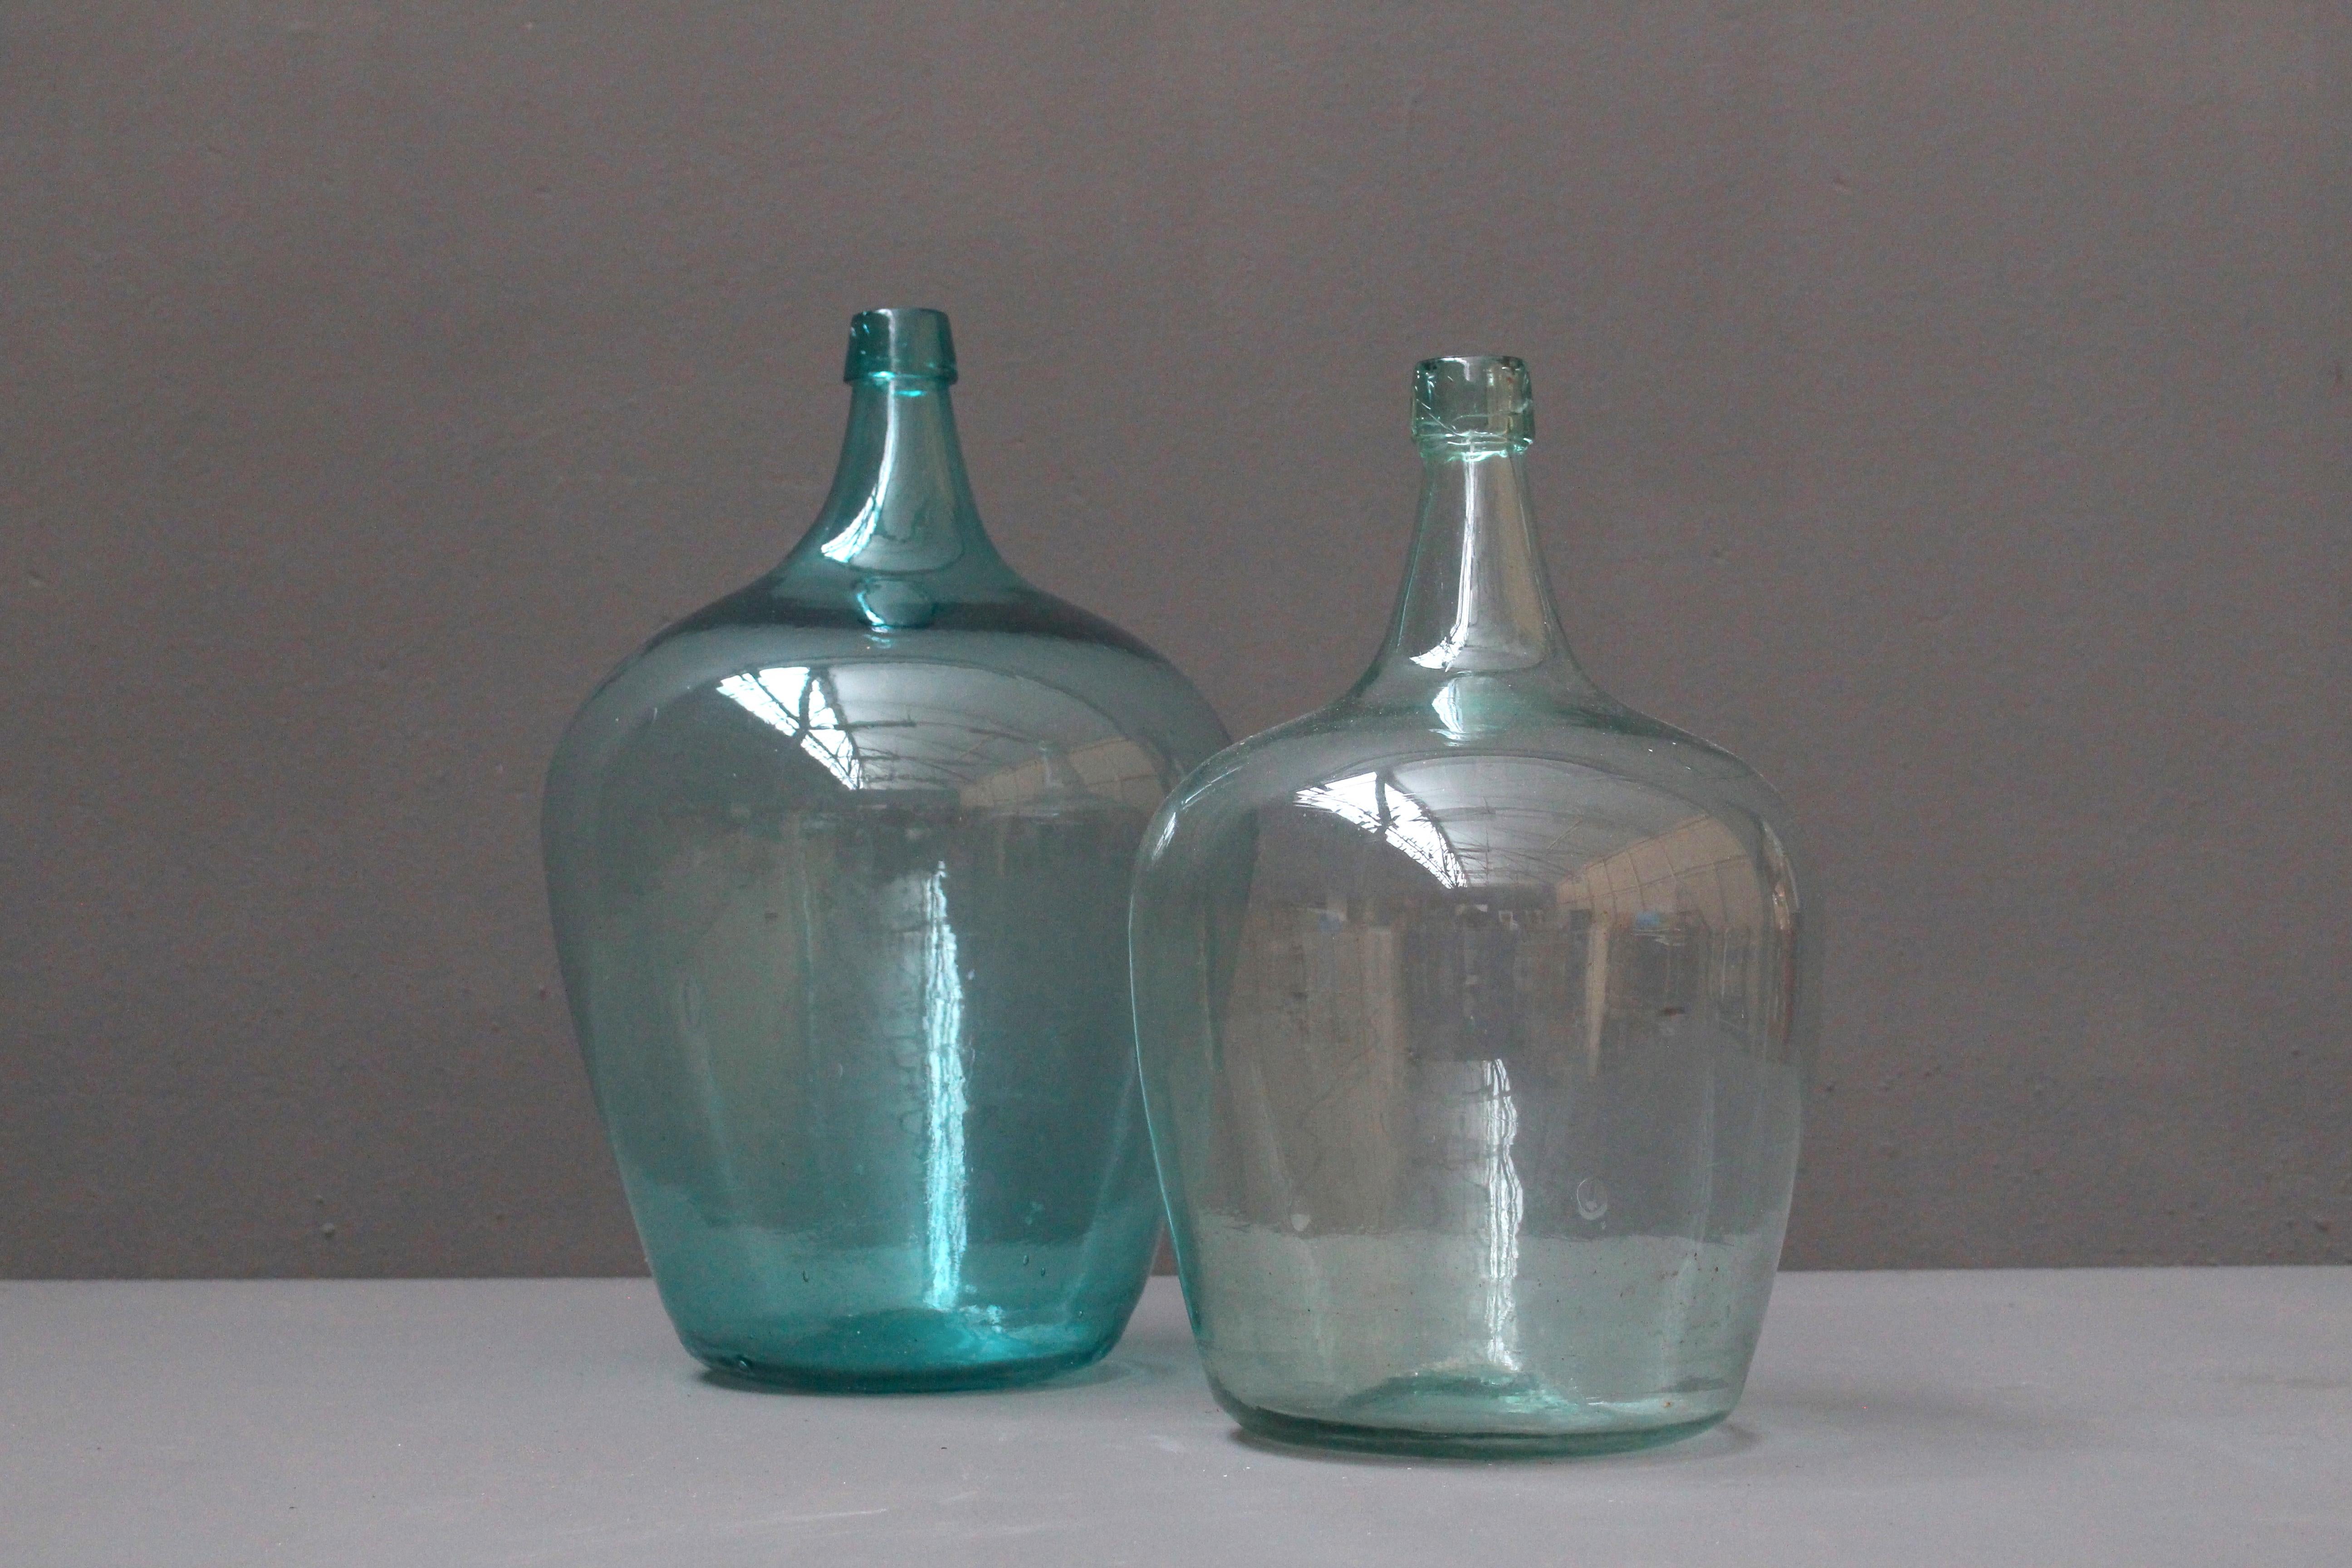 Lovely pair of French hand blown glass wine bottles from circa 1900.
Very decorative pieces.
These bottles have some beautiful air bubbles in the glass.
The turquoise color is very unique.